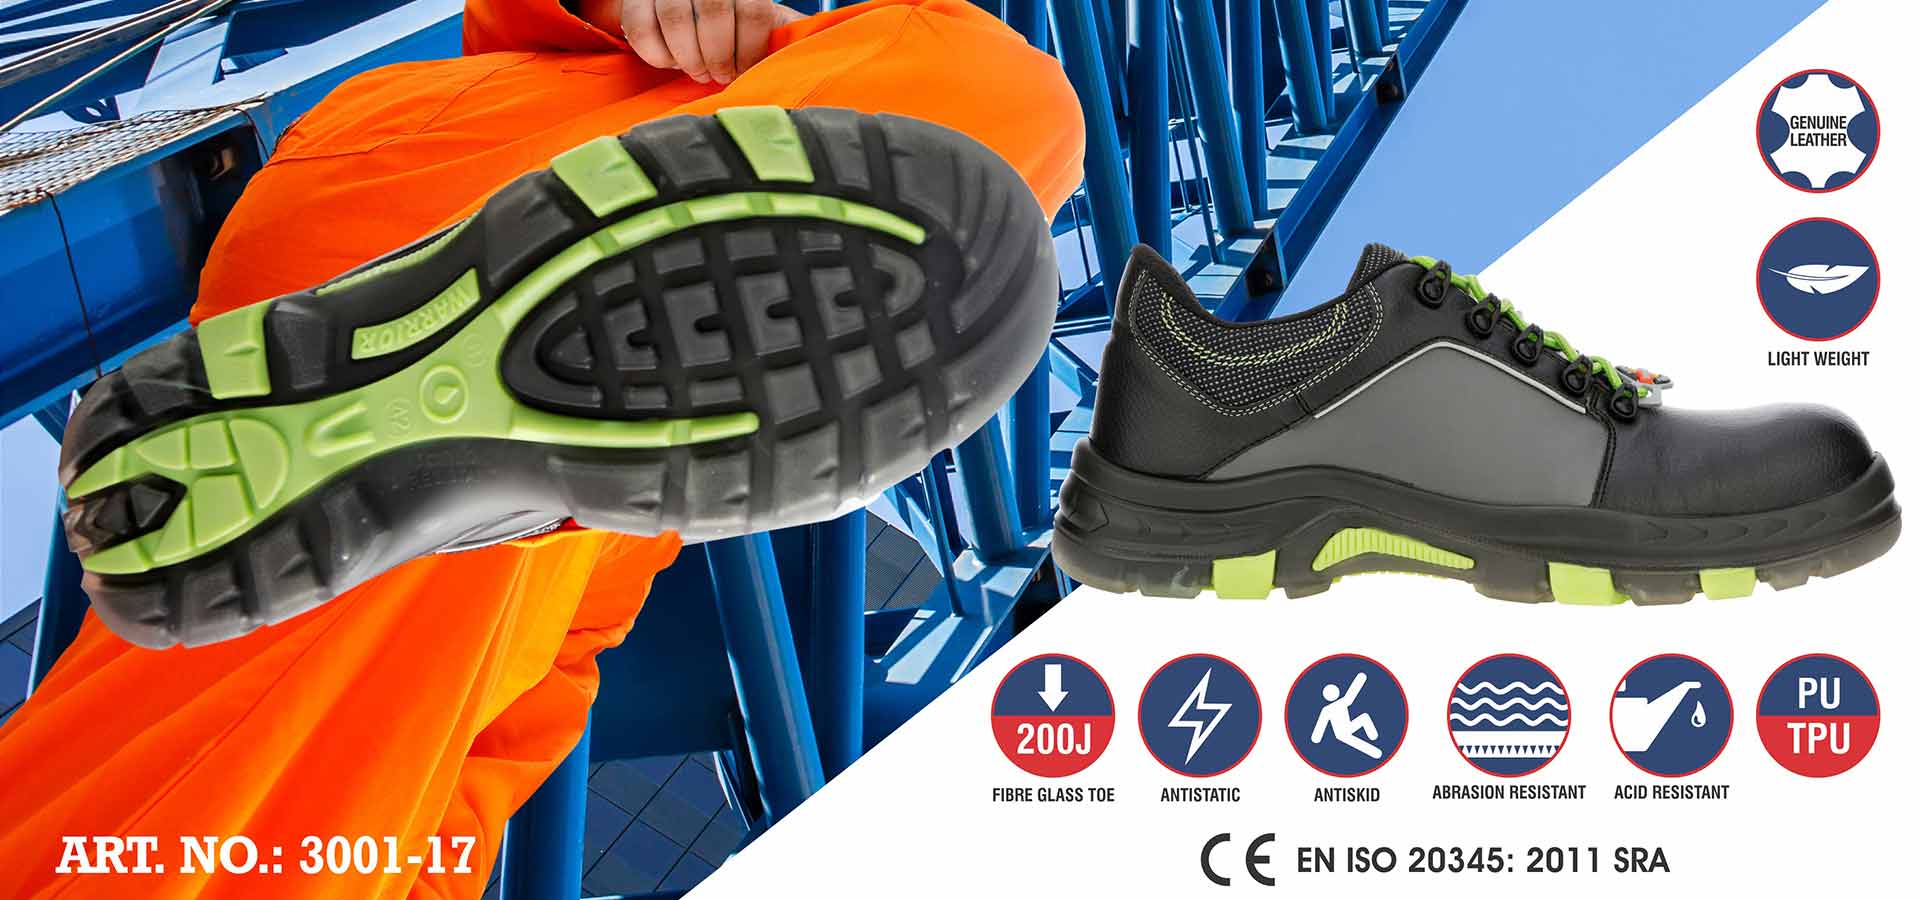 New arrival safety shoes